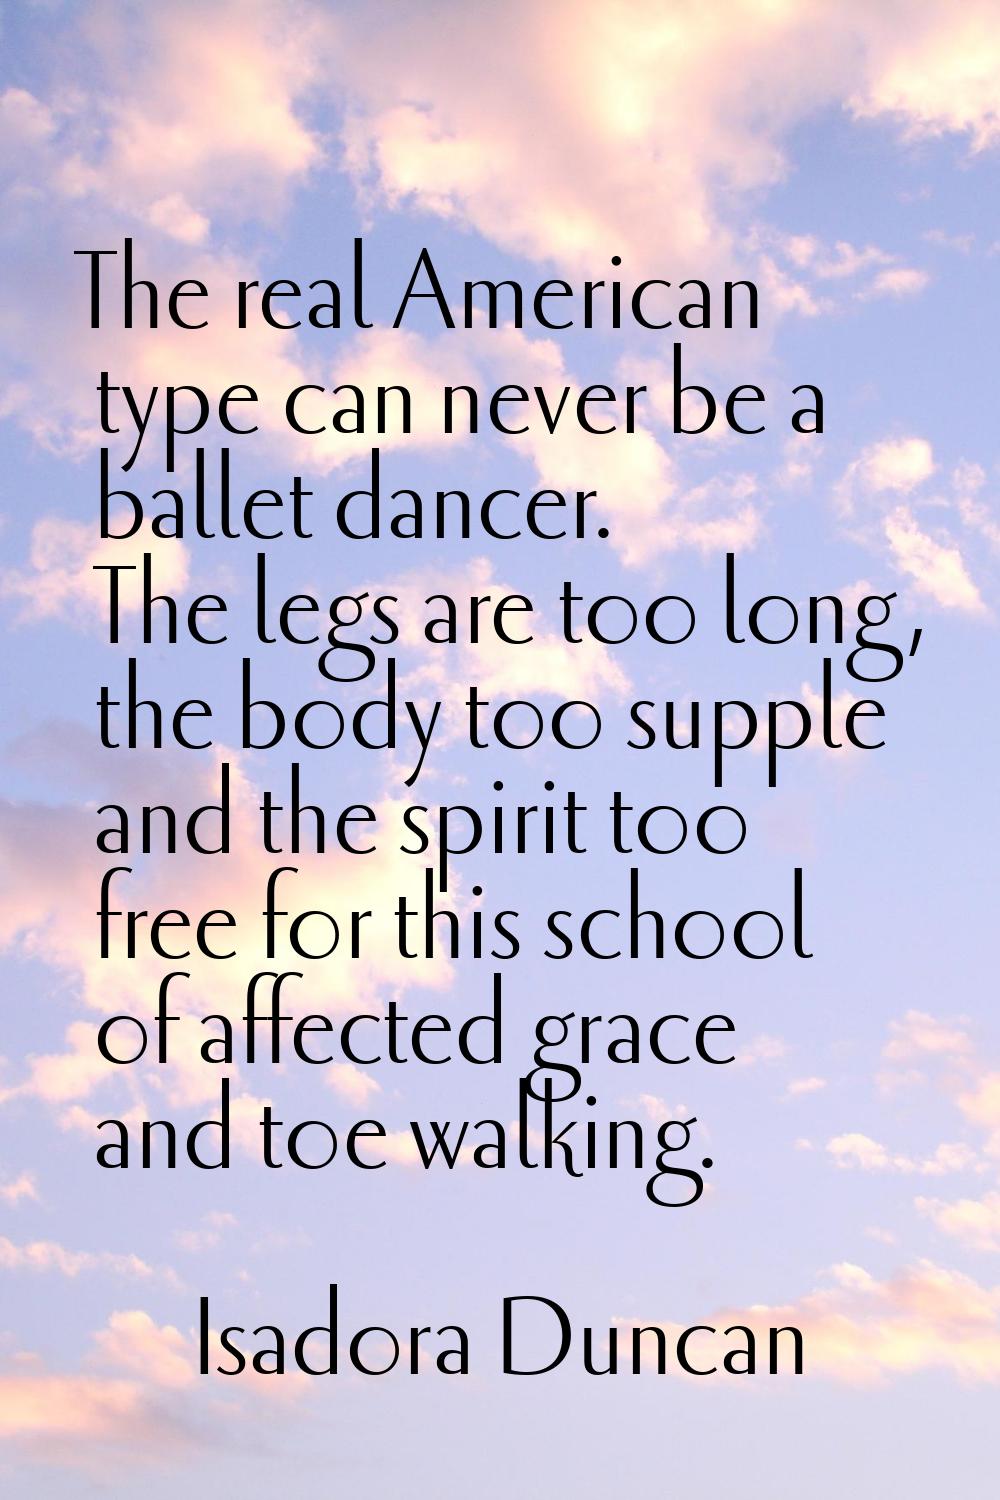 The real American type can never be a ballet dancer. The legs are too long, the body too supple and